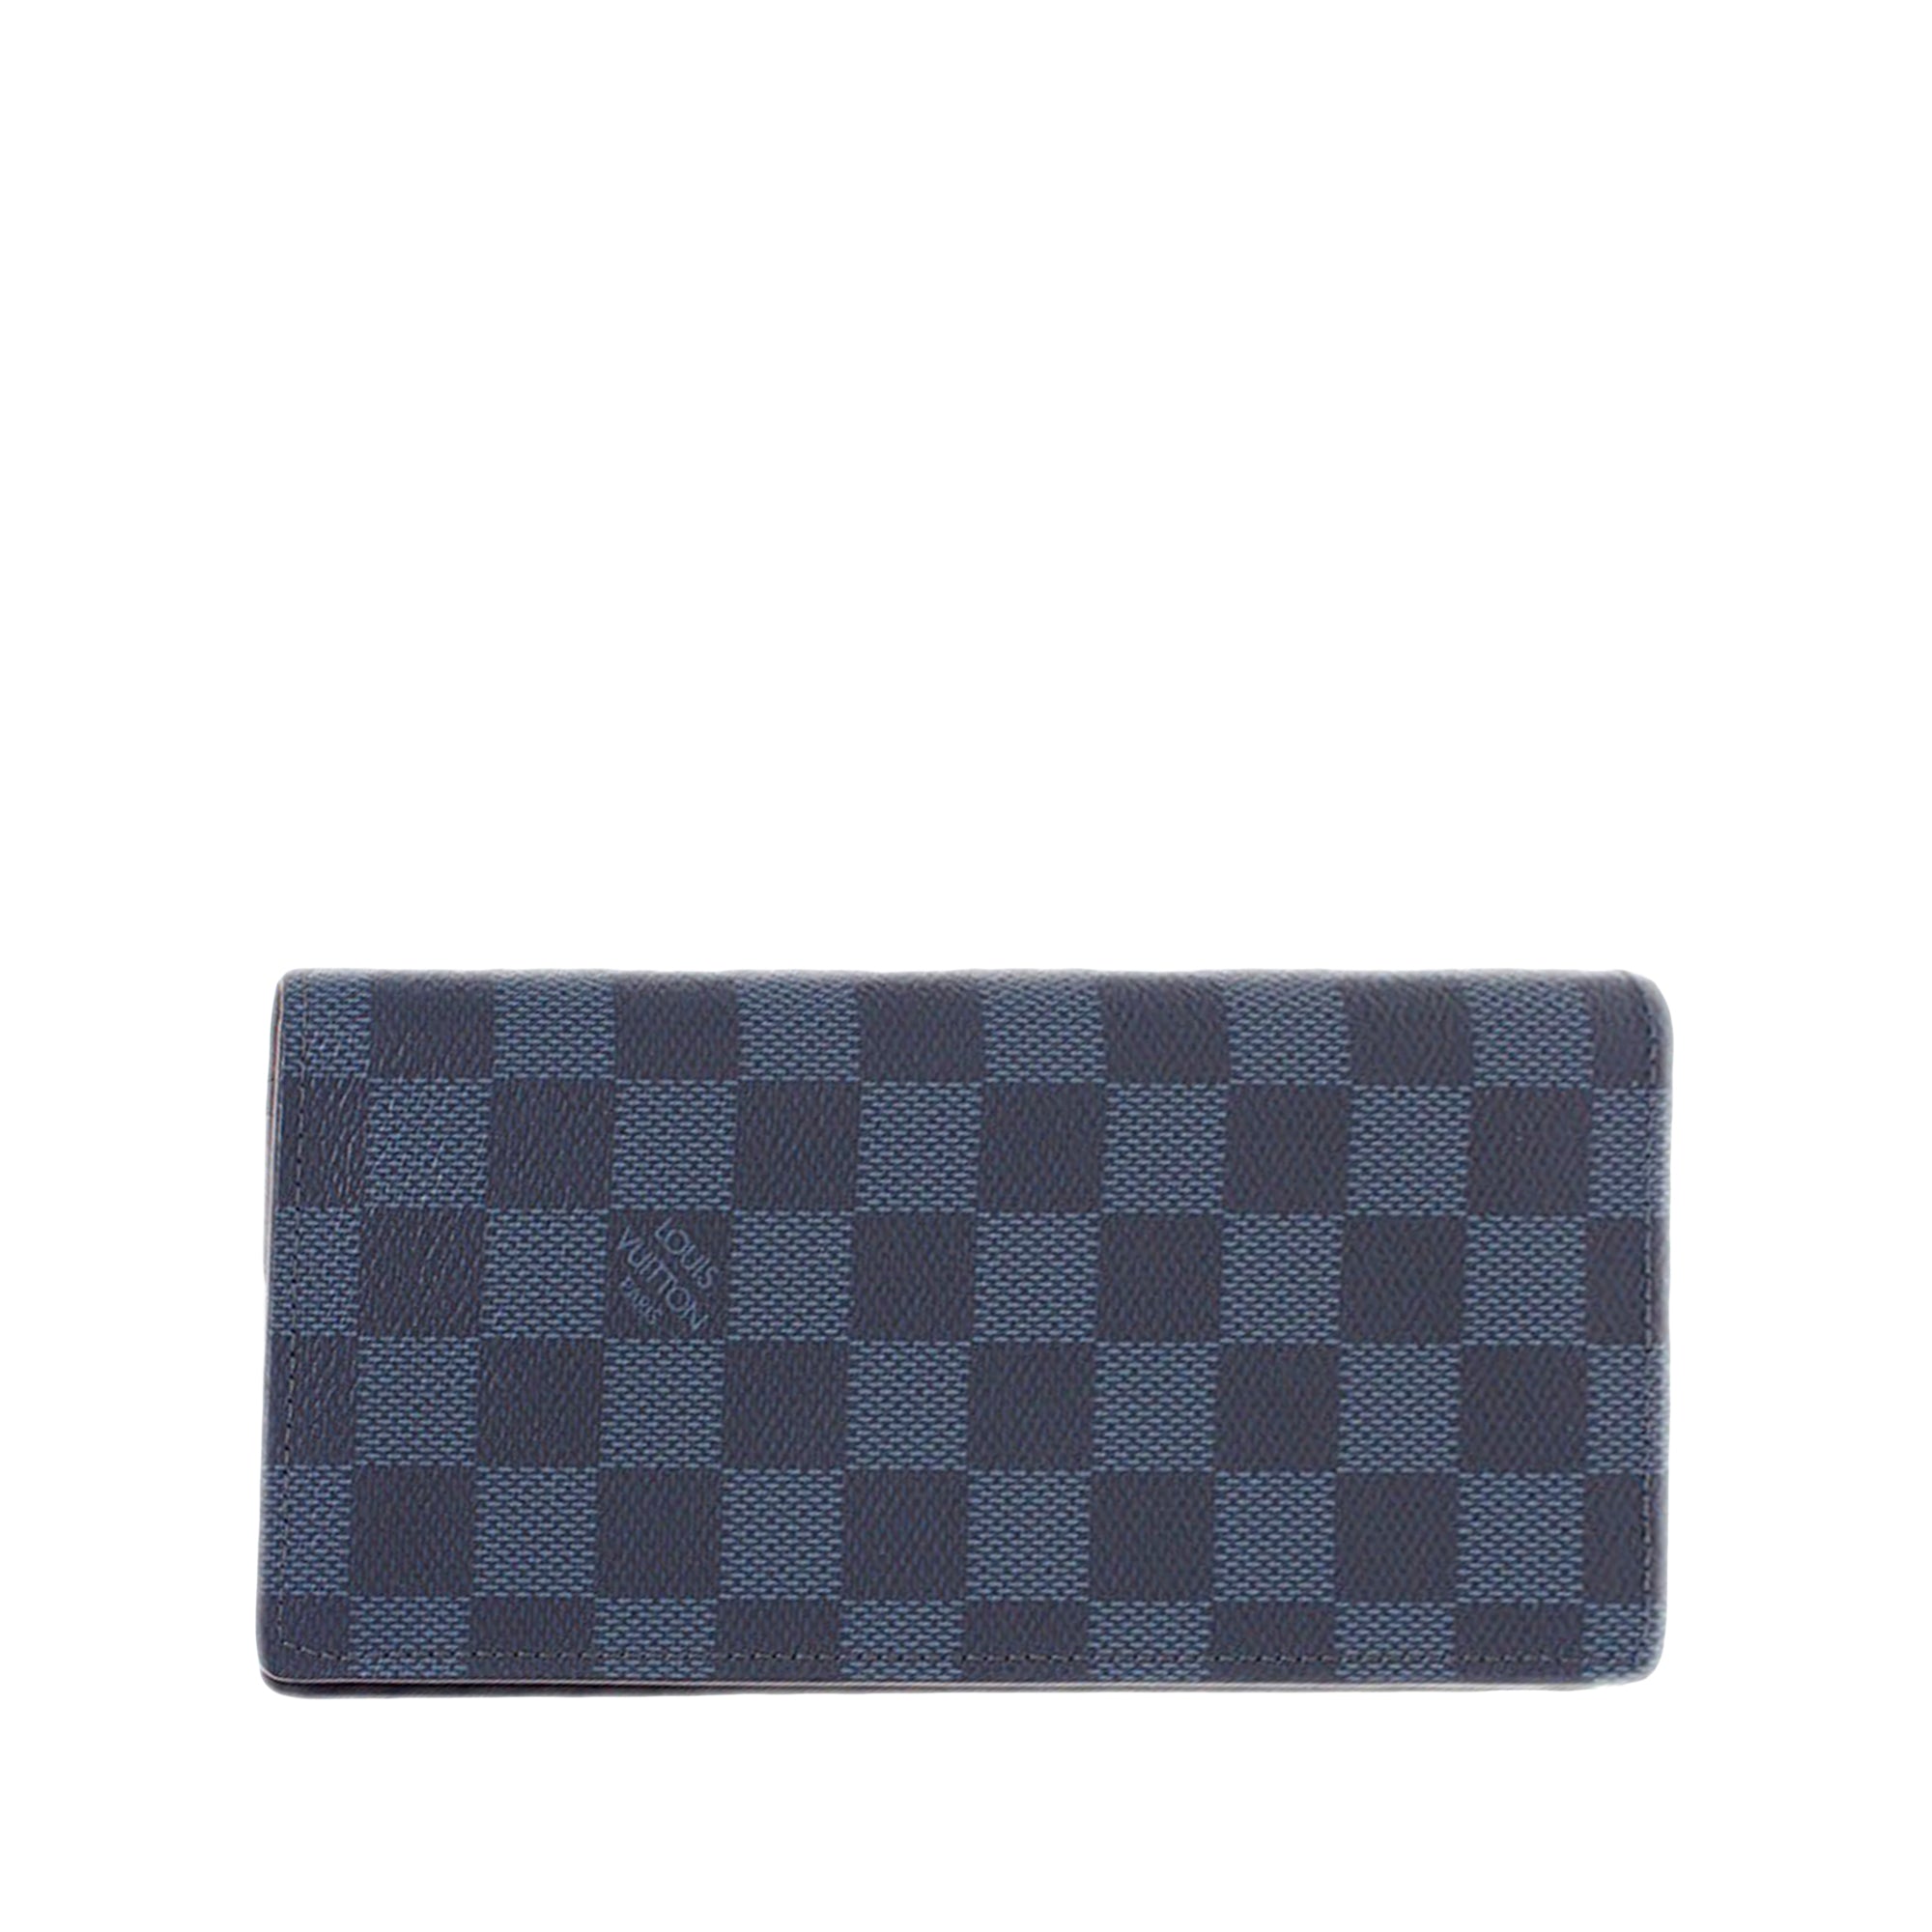 The Louis Vuitton Brazza Wallet in Damier Cobalt is a new must have for  Men.